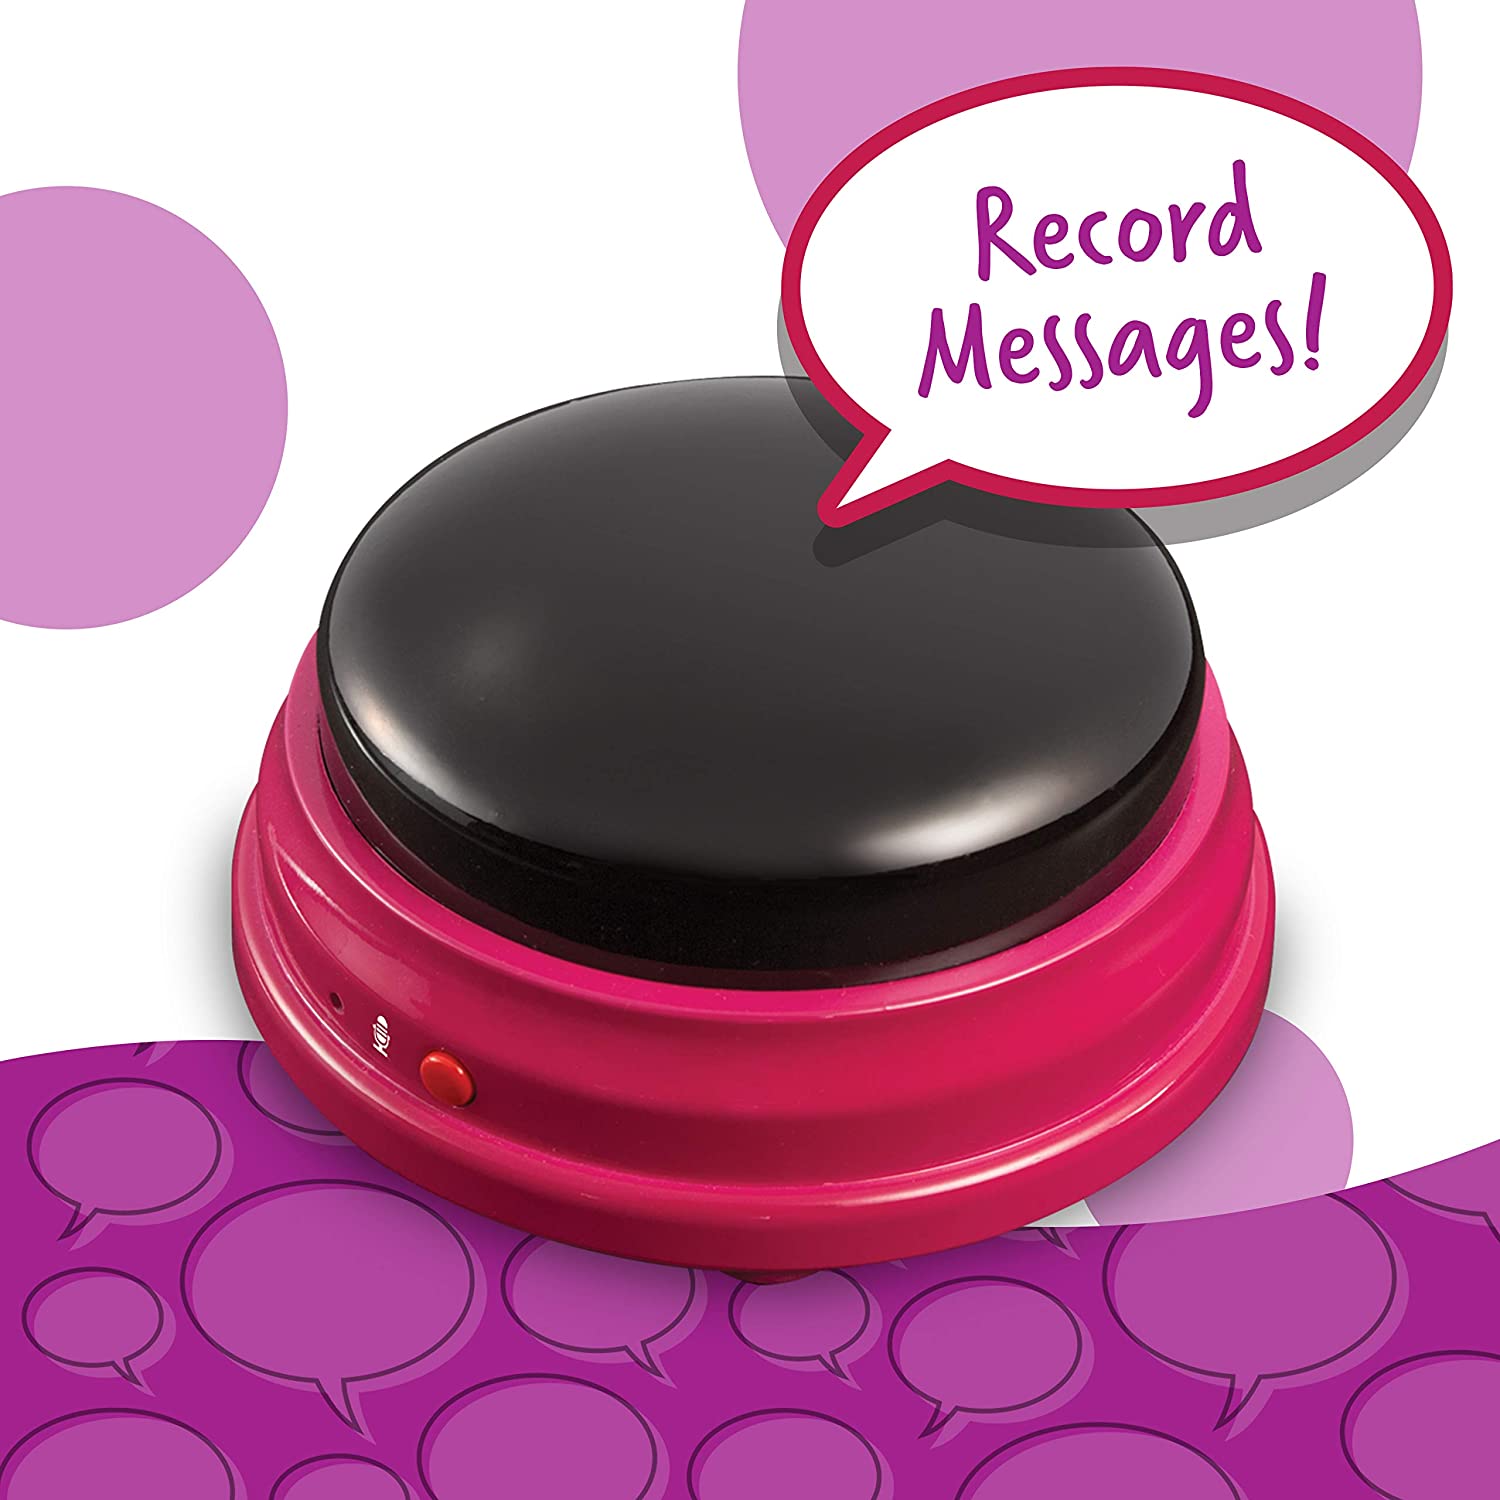 The pink Recordable Answer Buzzer.